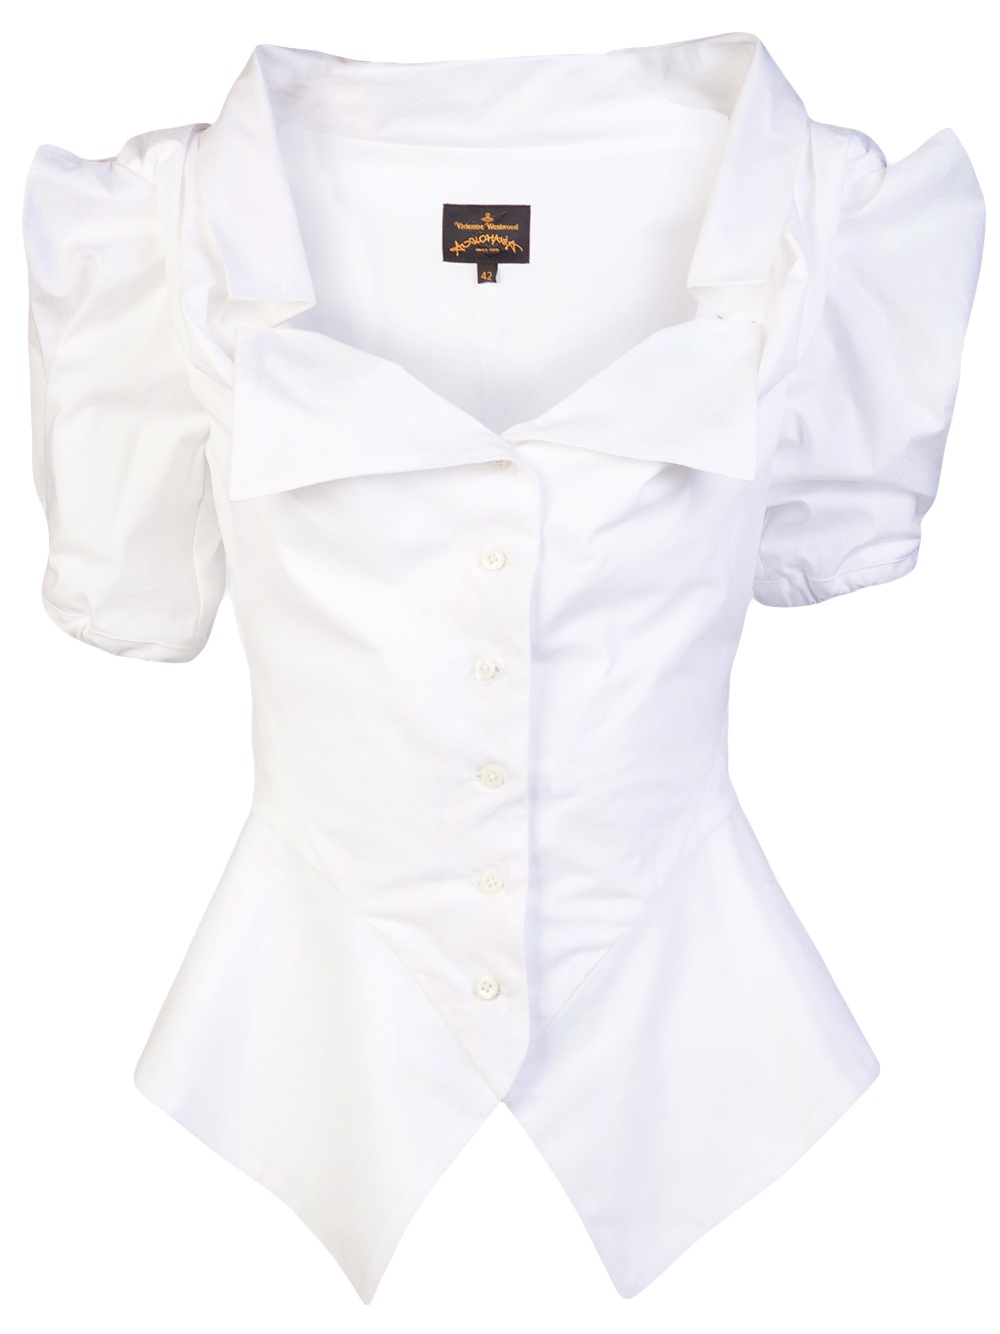 Vivienne Westwood Anglomania Poppy Blouse in White | Lyst UK